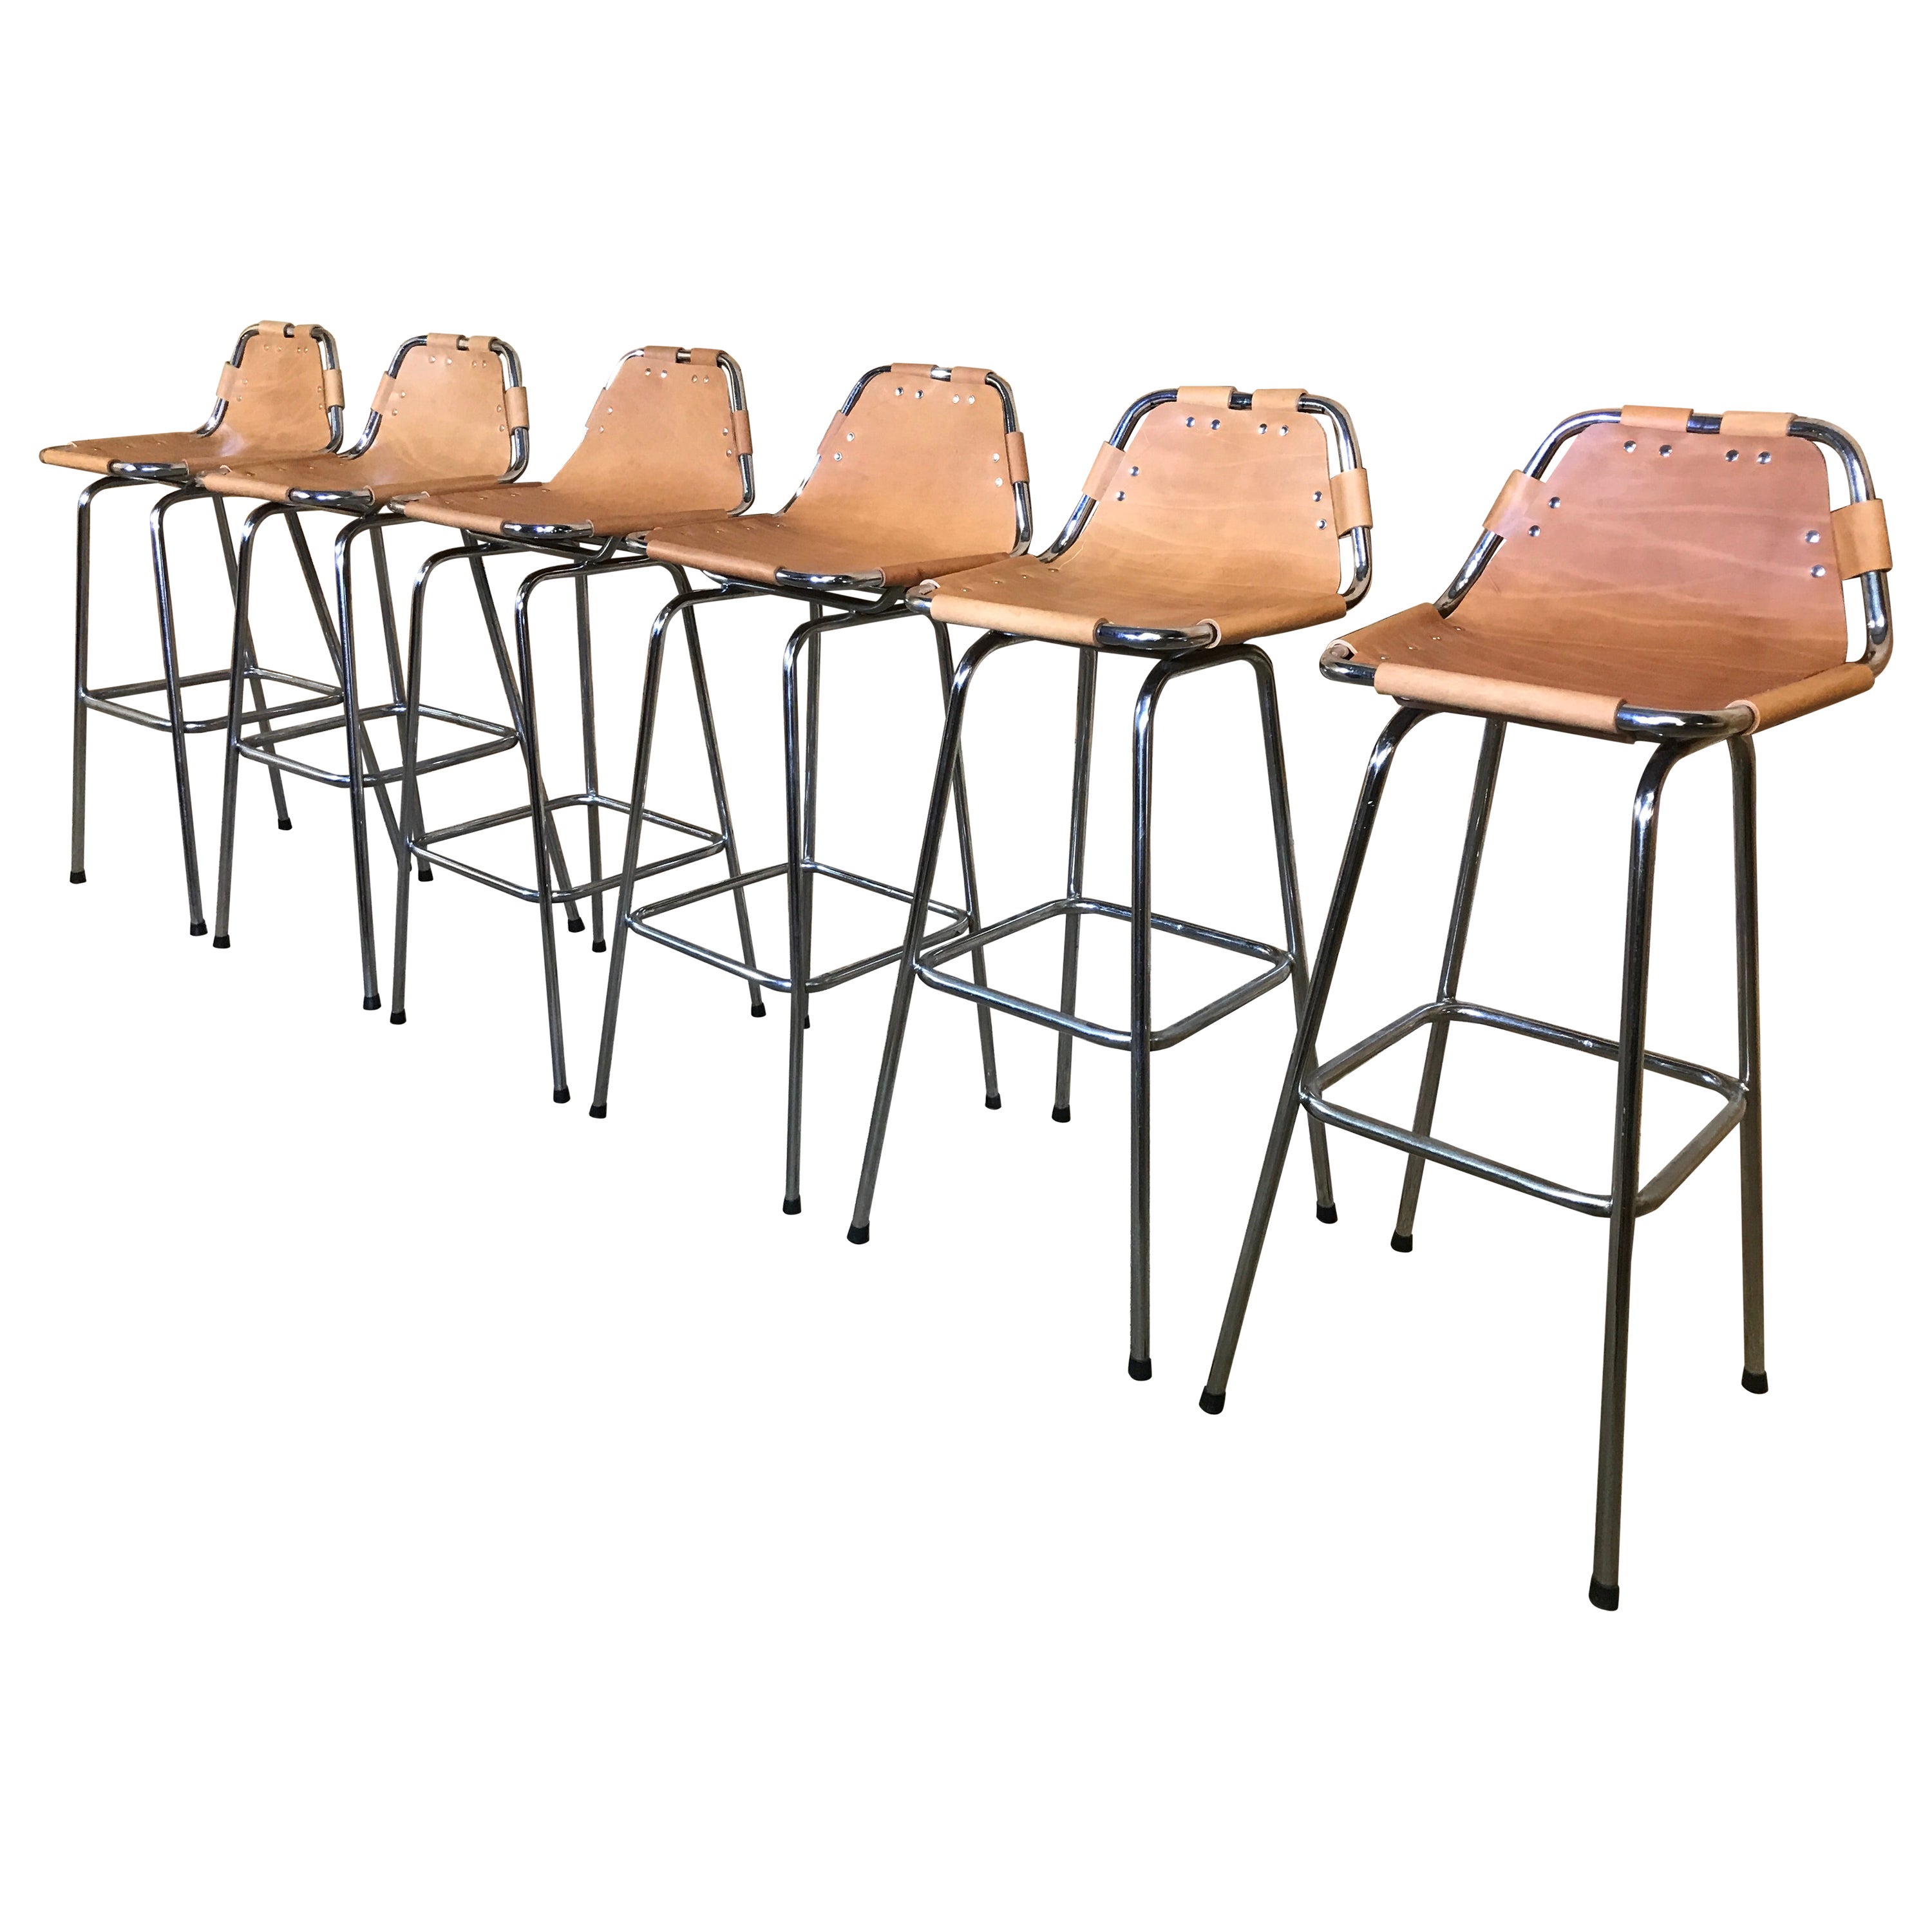 Vintage cognac colour Leather Stools Selected by Charlotte Perriand for Les Arcs